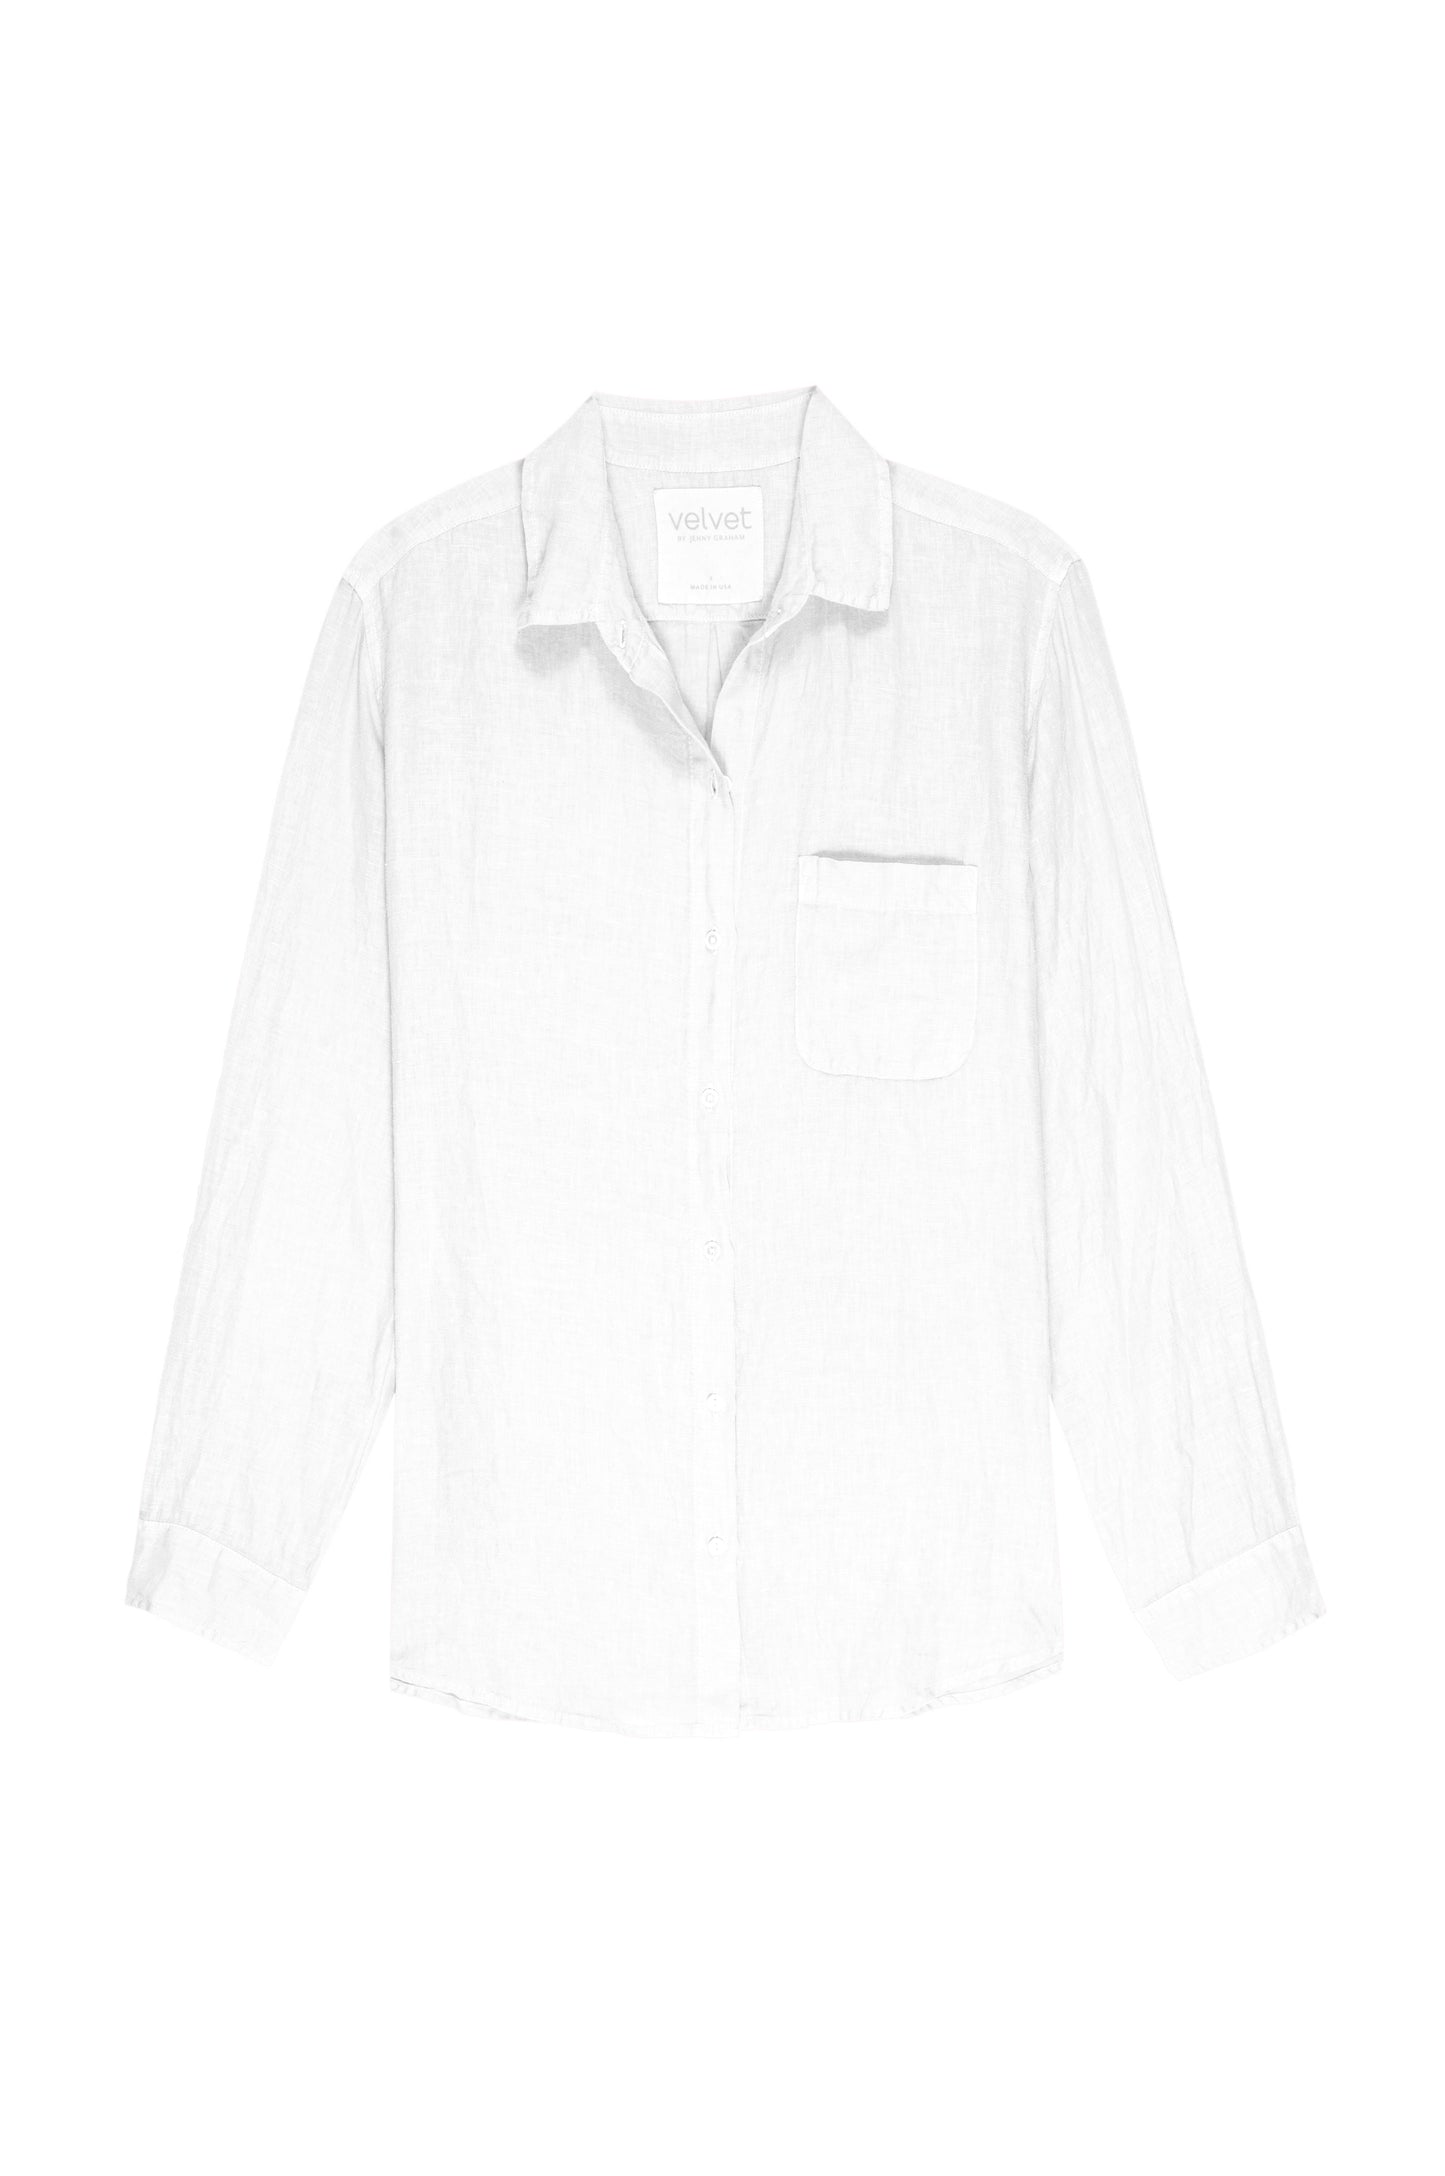 MULHOLLAND LINEN SHIRT by Velvet by Jenny Graham: White long-sleeve linen button-up shirt with a single chest pocket and a relaxed silhouette, featuring a scooped hemline, displayed against a white background.-25134162641089